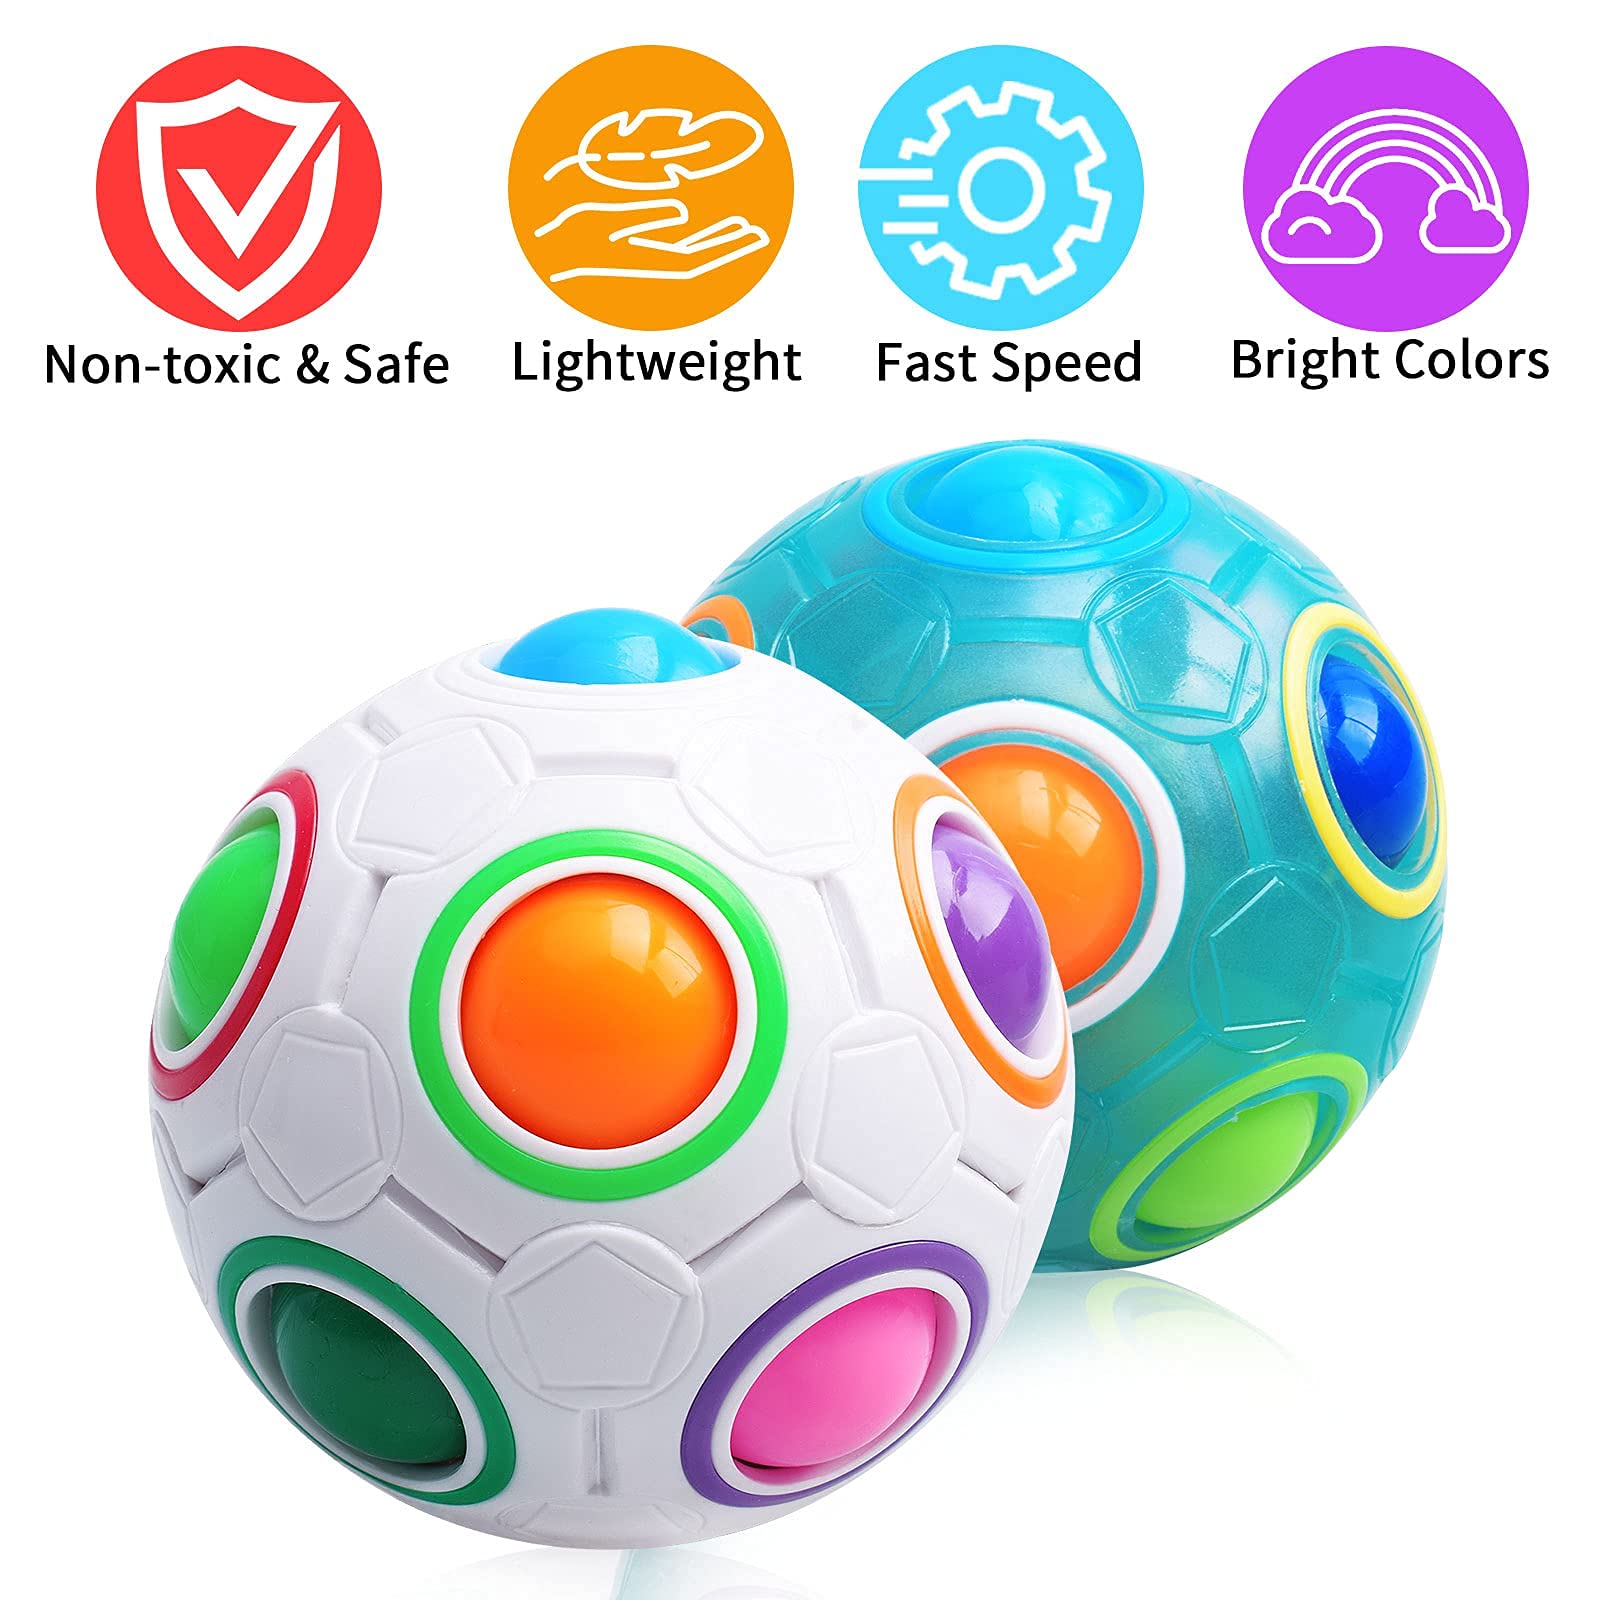 DPTOYZ Rainbow Puzzle Ball Fidget Toy Color-Matching Puzzle Game Fidget Balls Stress Reliever Magic Cube Toys Brain Teaser for Children/Teens/Adults - 2 Pack